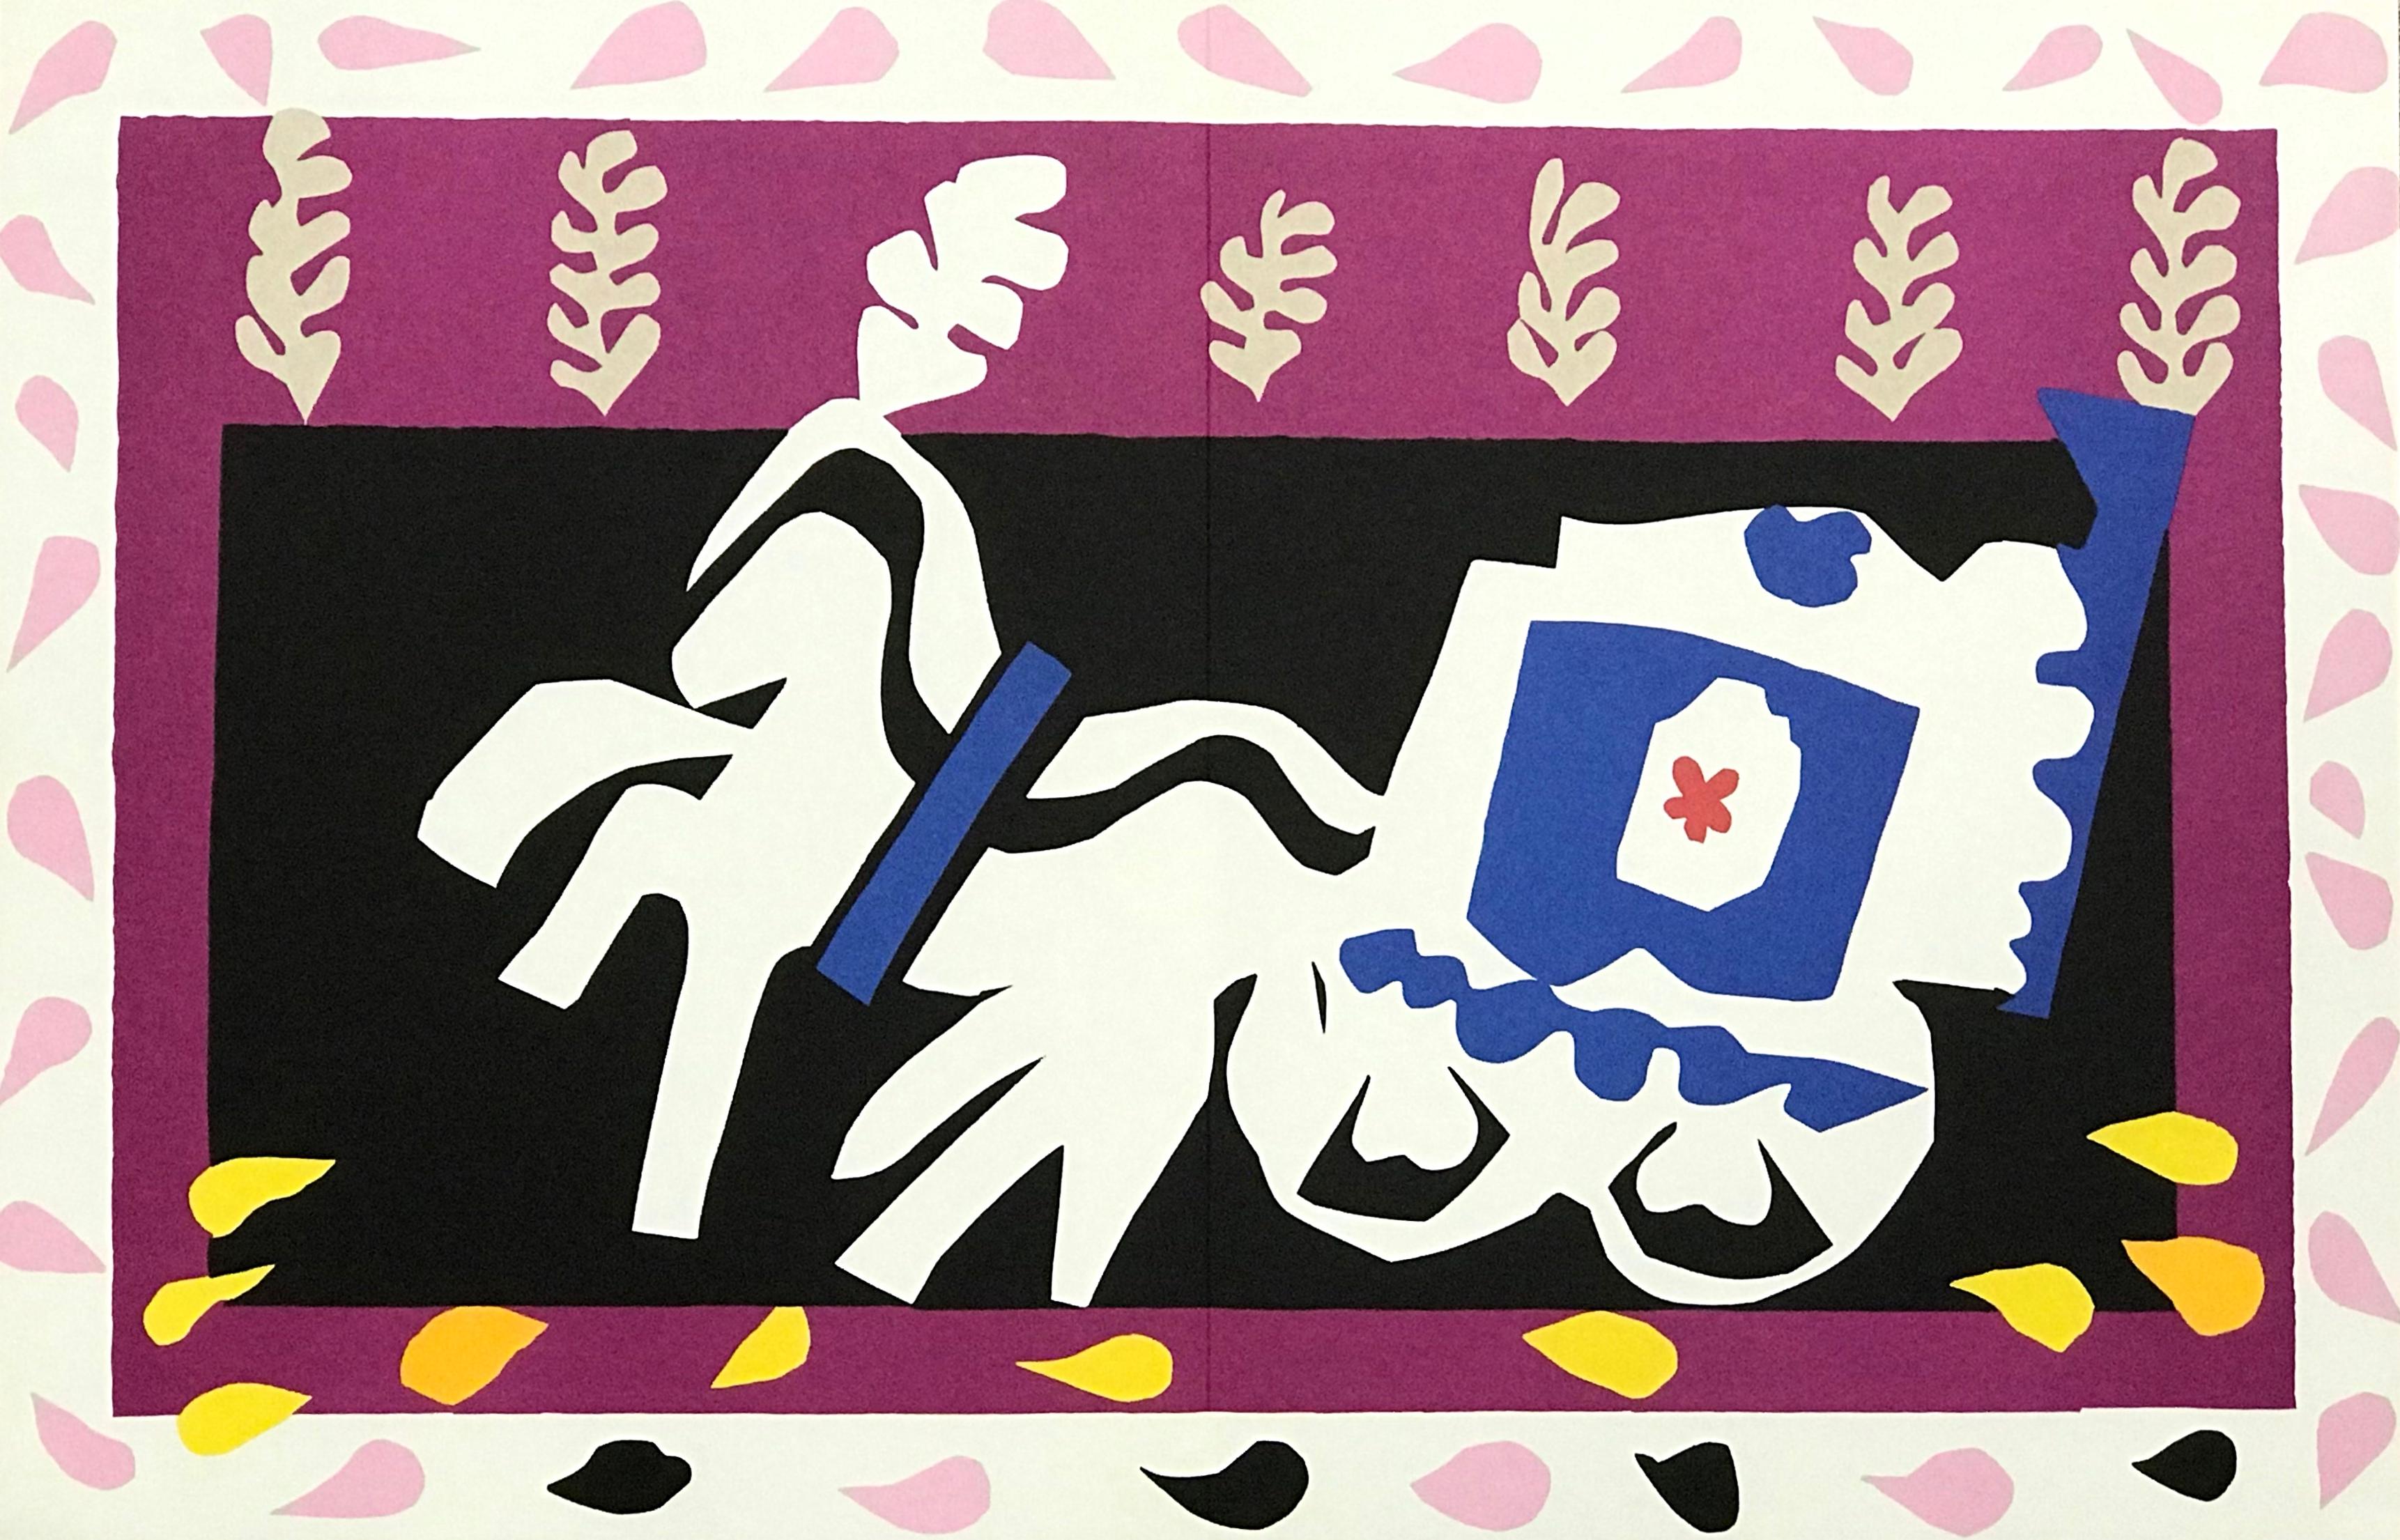 "Pierrot's Funeral" from Jazz - Print by (after) Henri Matisse